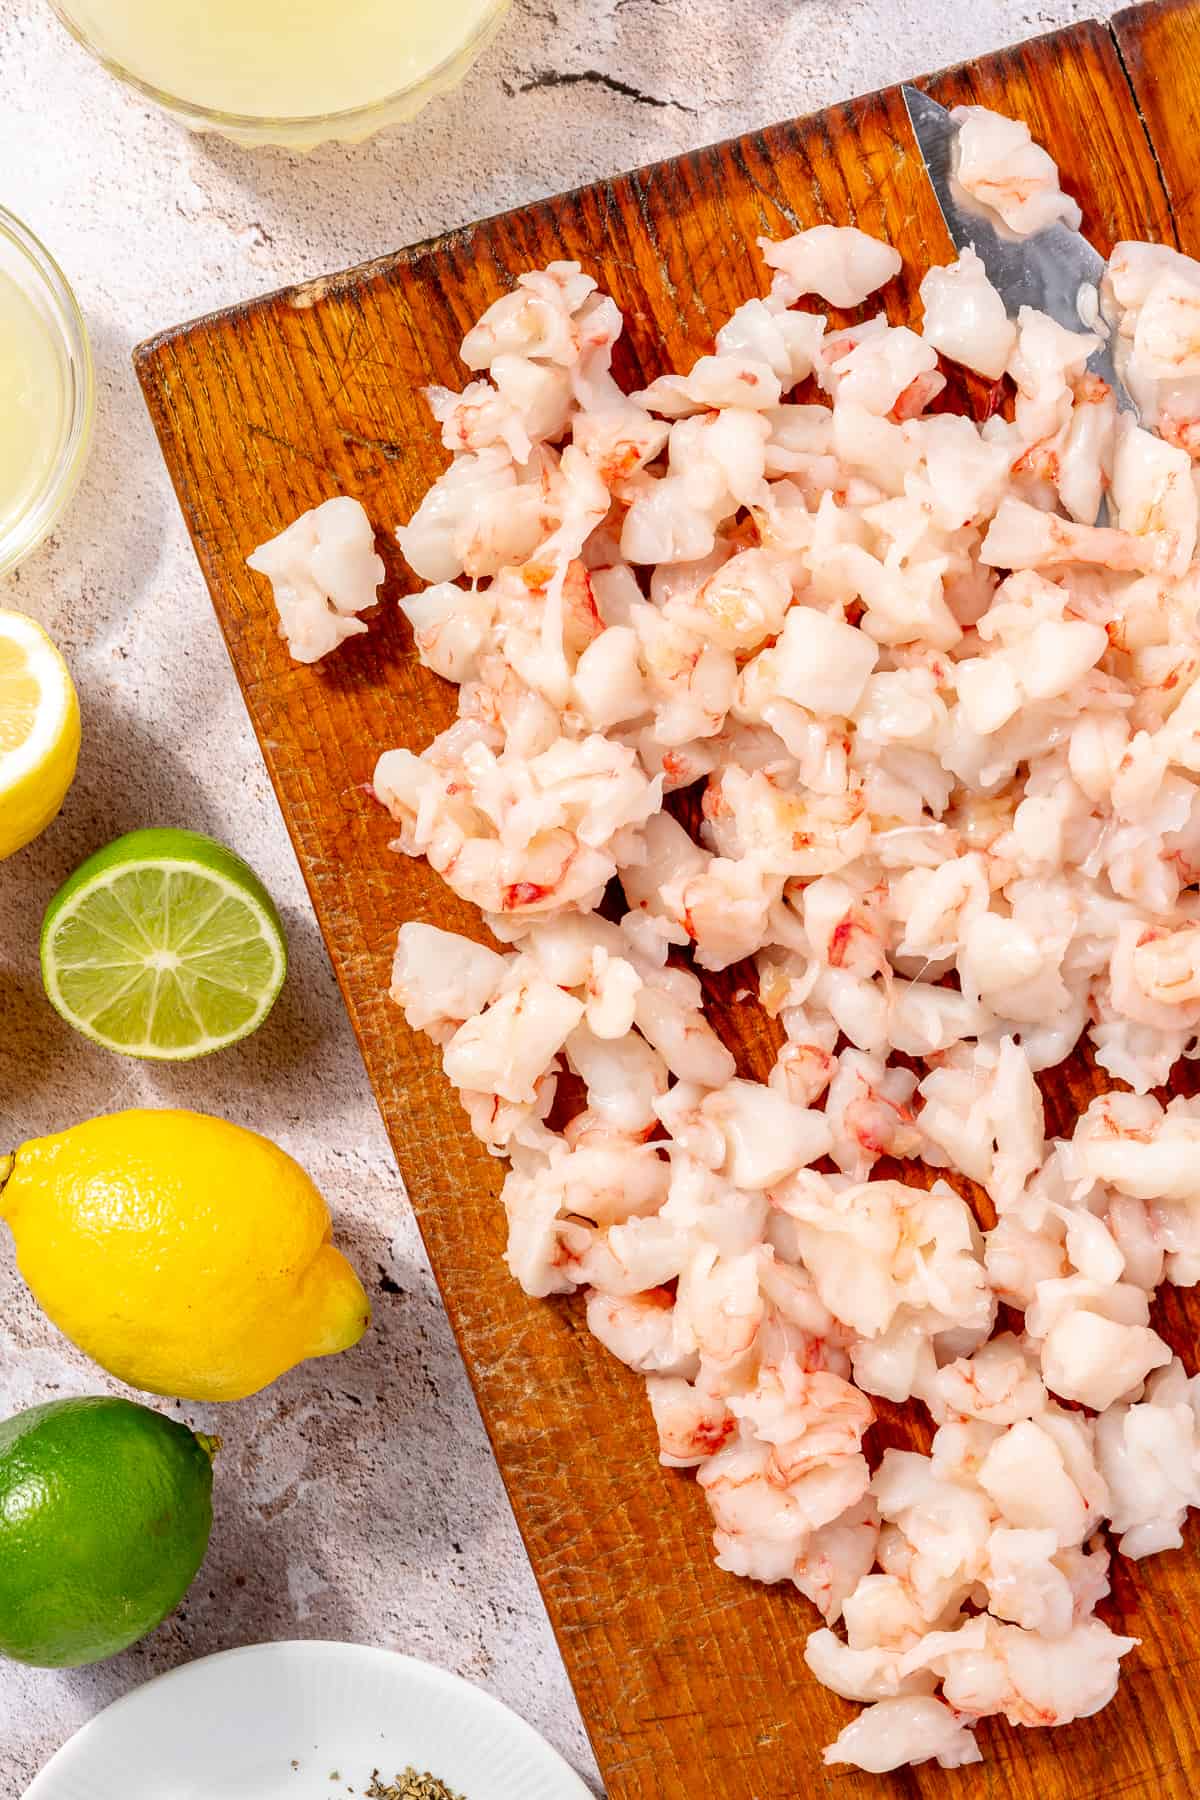 Chopped shrimp on cutting board. Lemons and limes on the side peeking in.